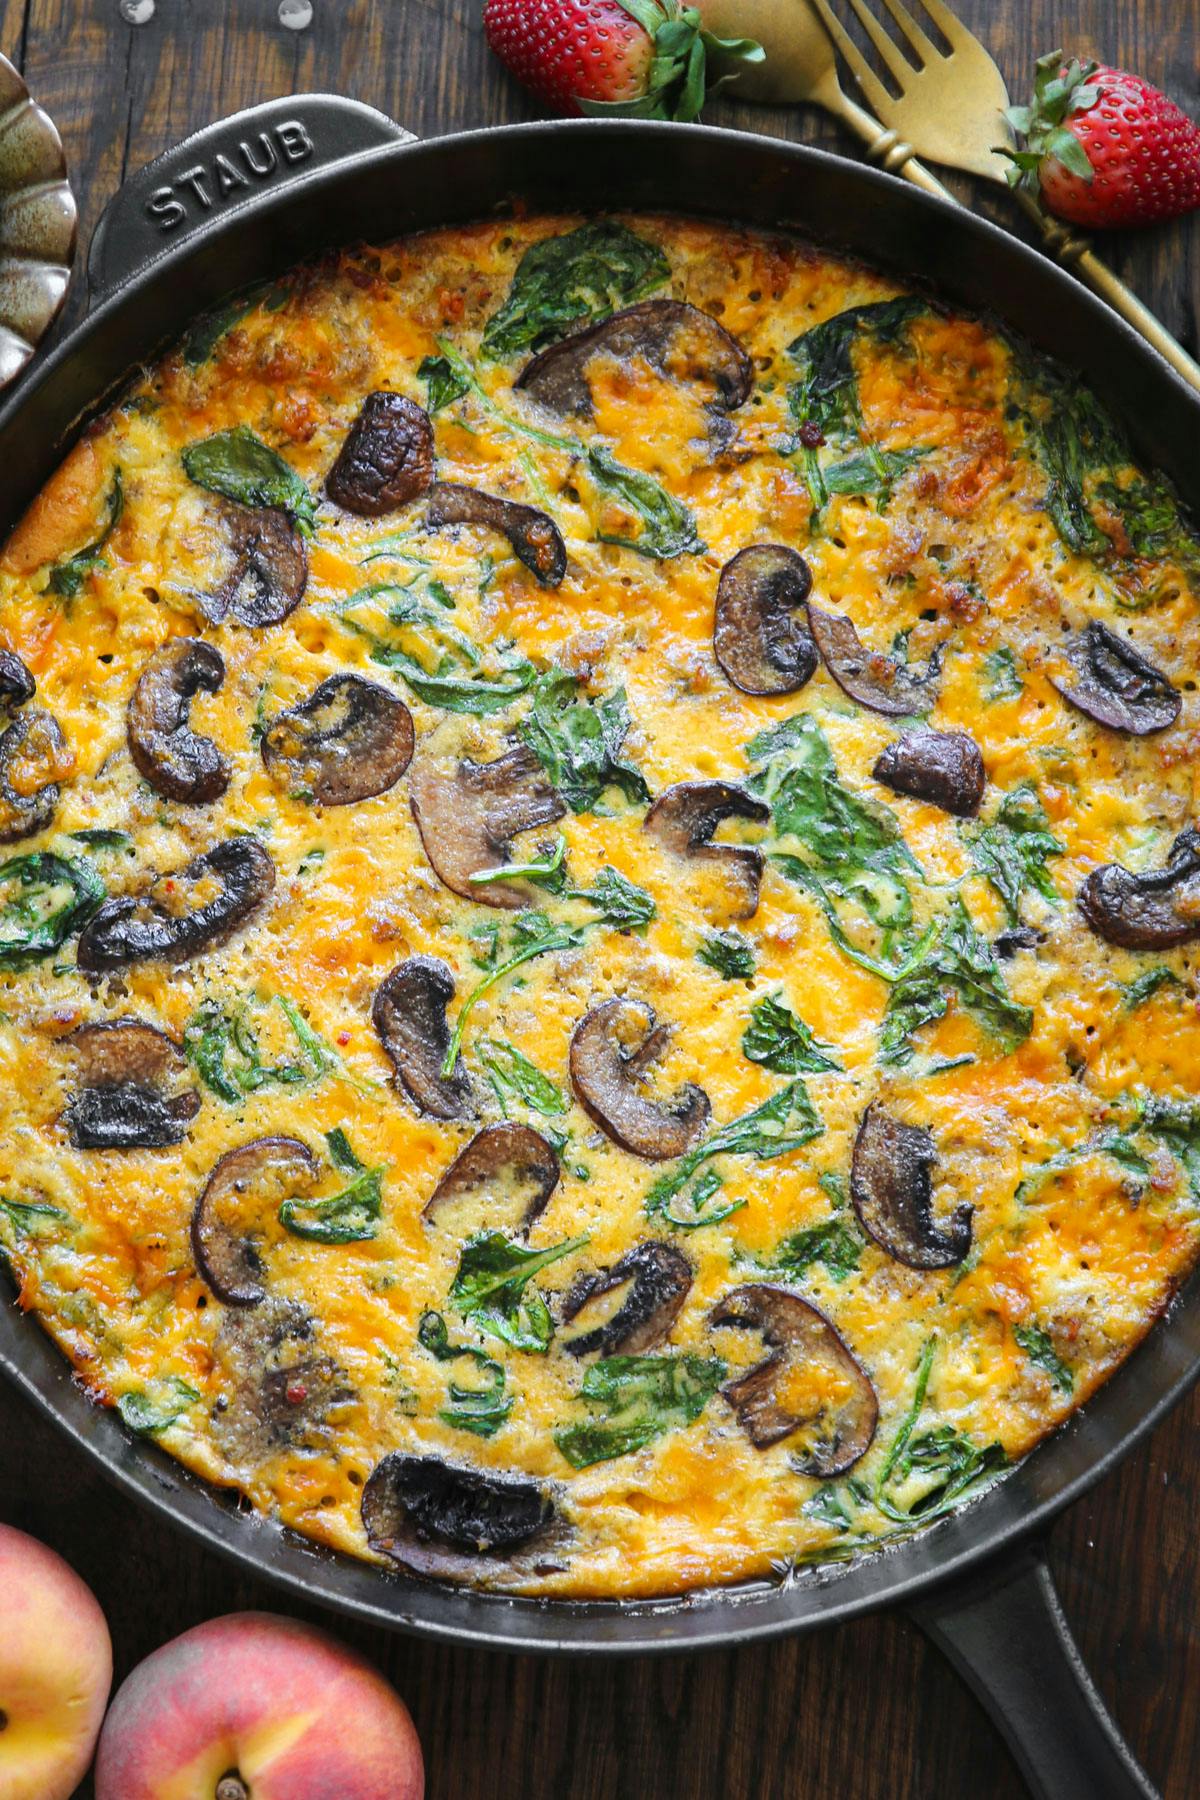 Sausage Frittata with Spinach, Mushrooms, and Cheddar